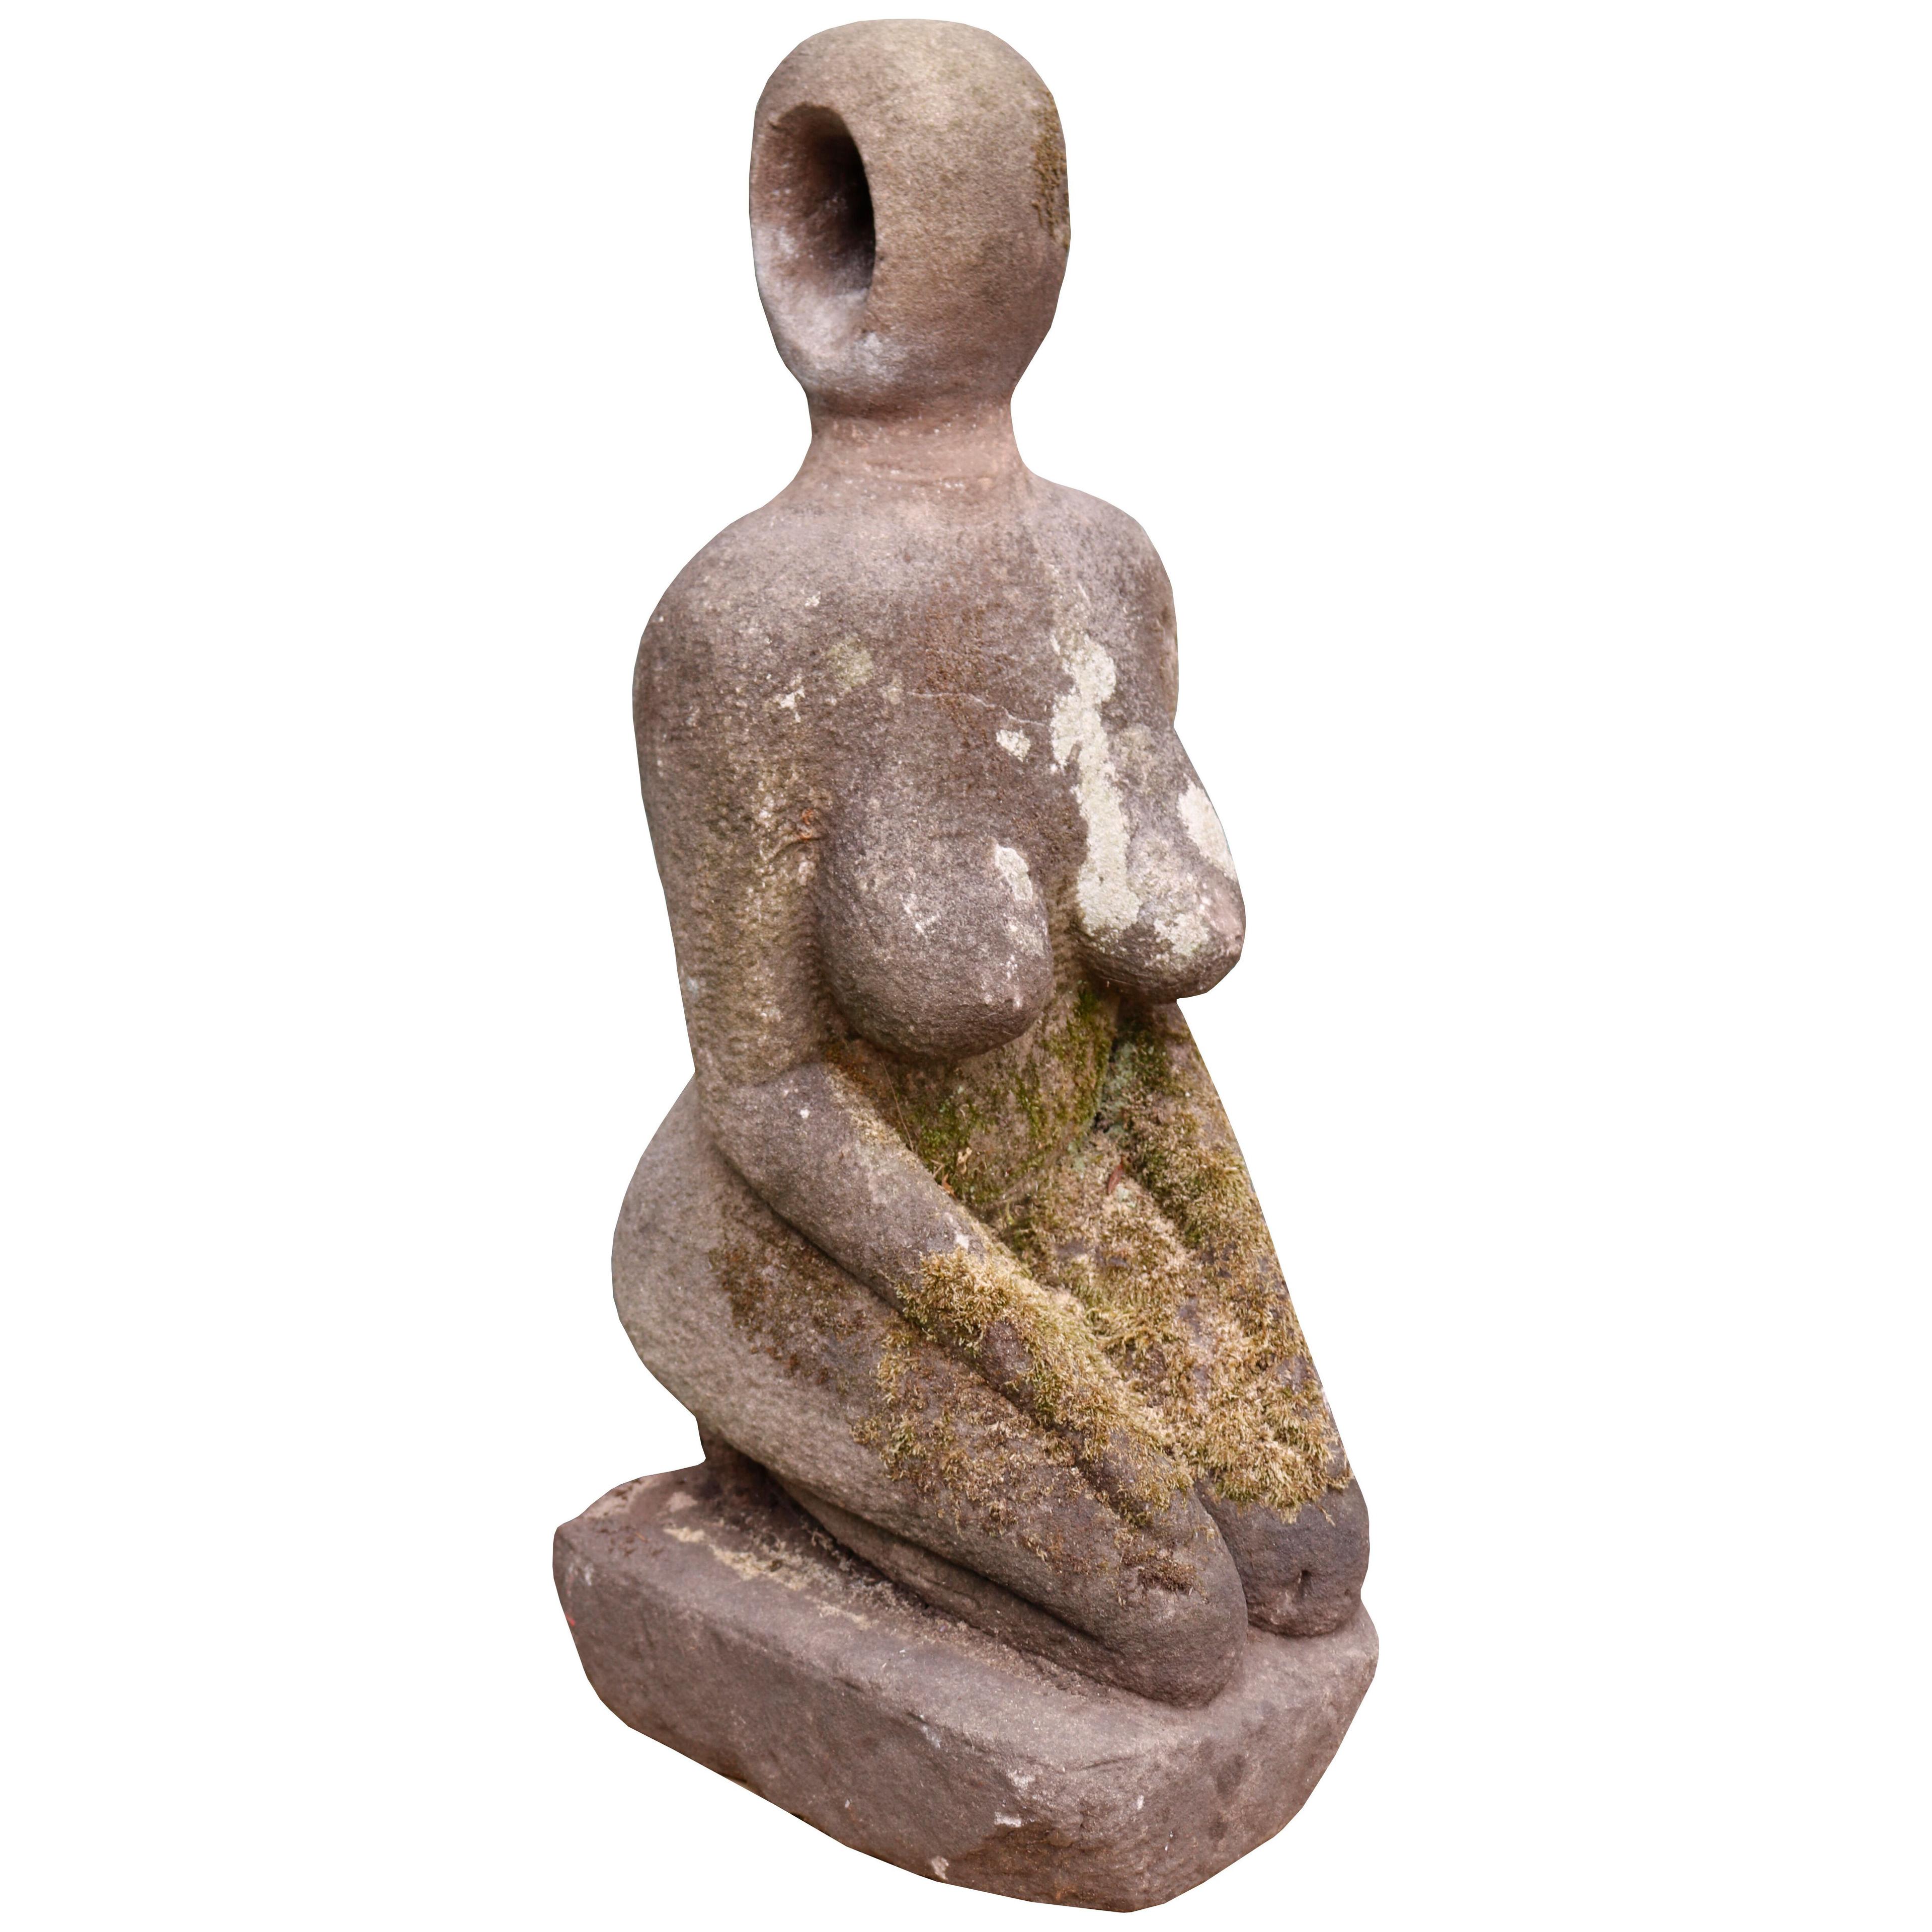 Abstract Stone Sculpture of a Female Form